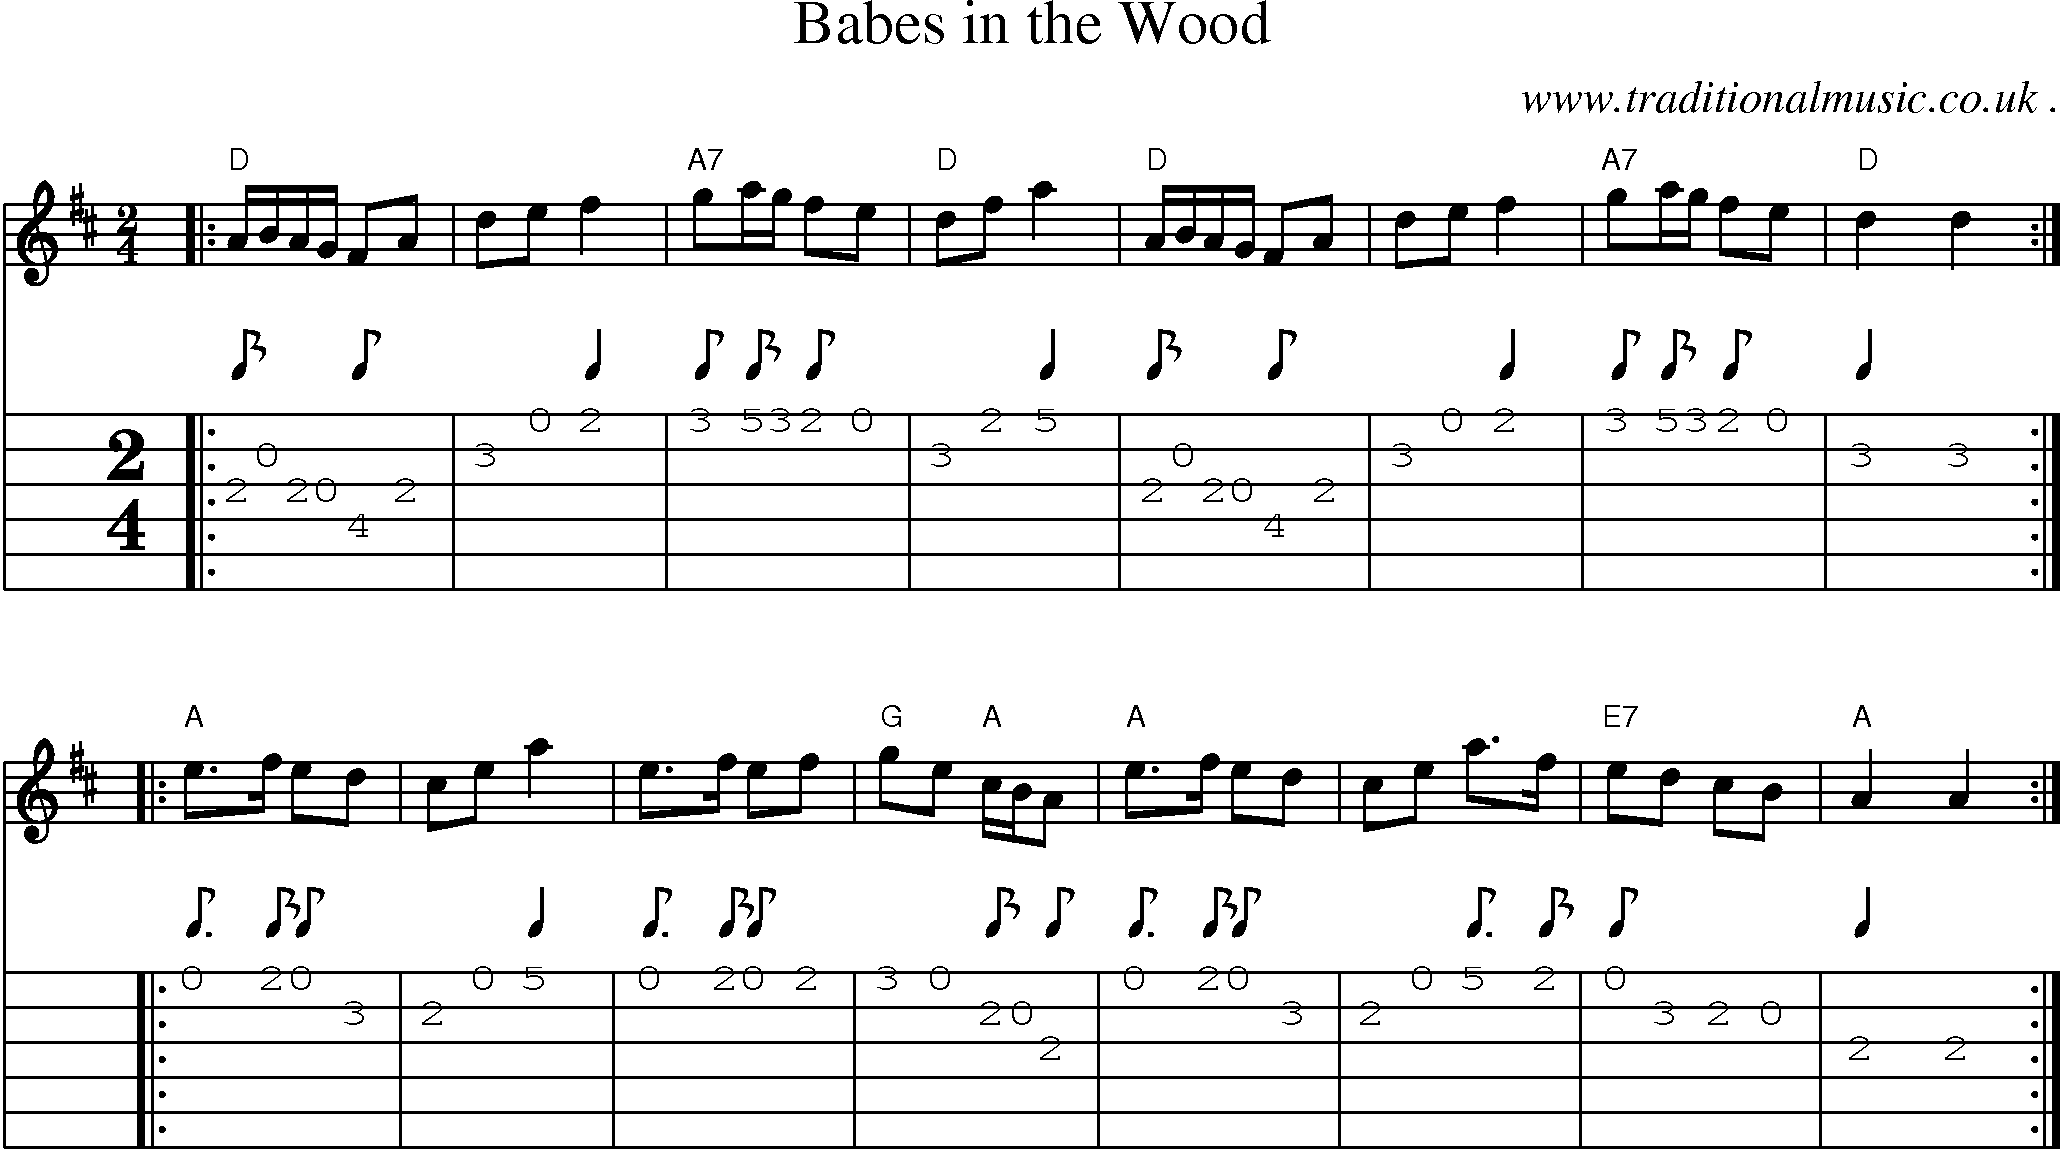 Sheet-music  score, Chords and Guitar Tabs for Babes In The Wood